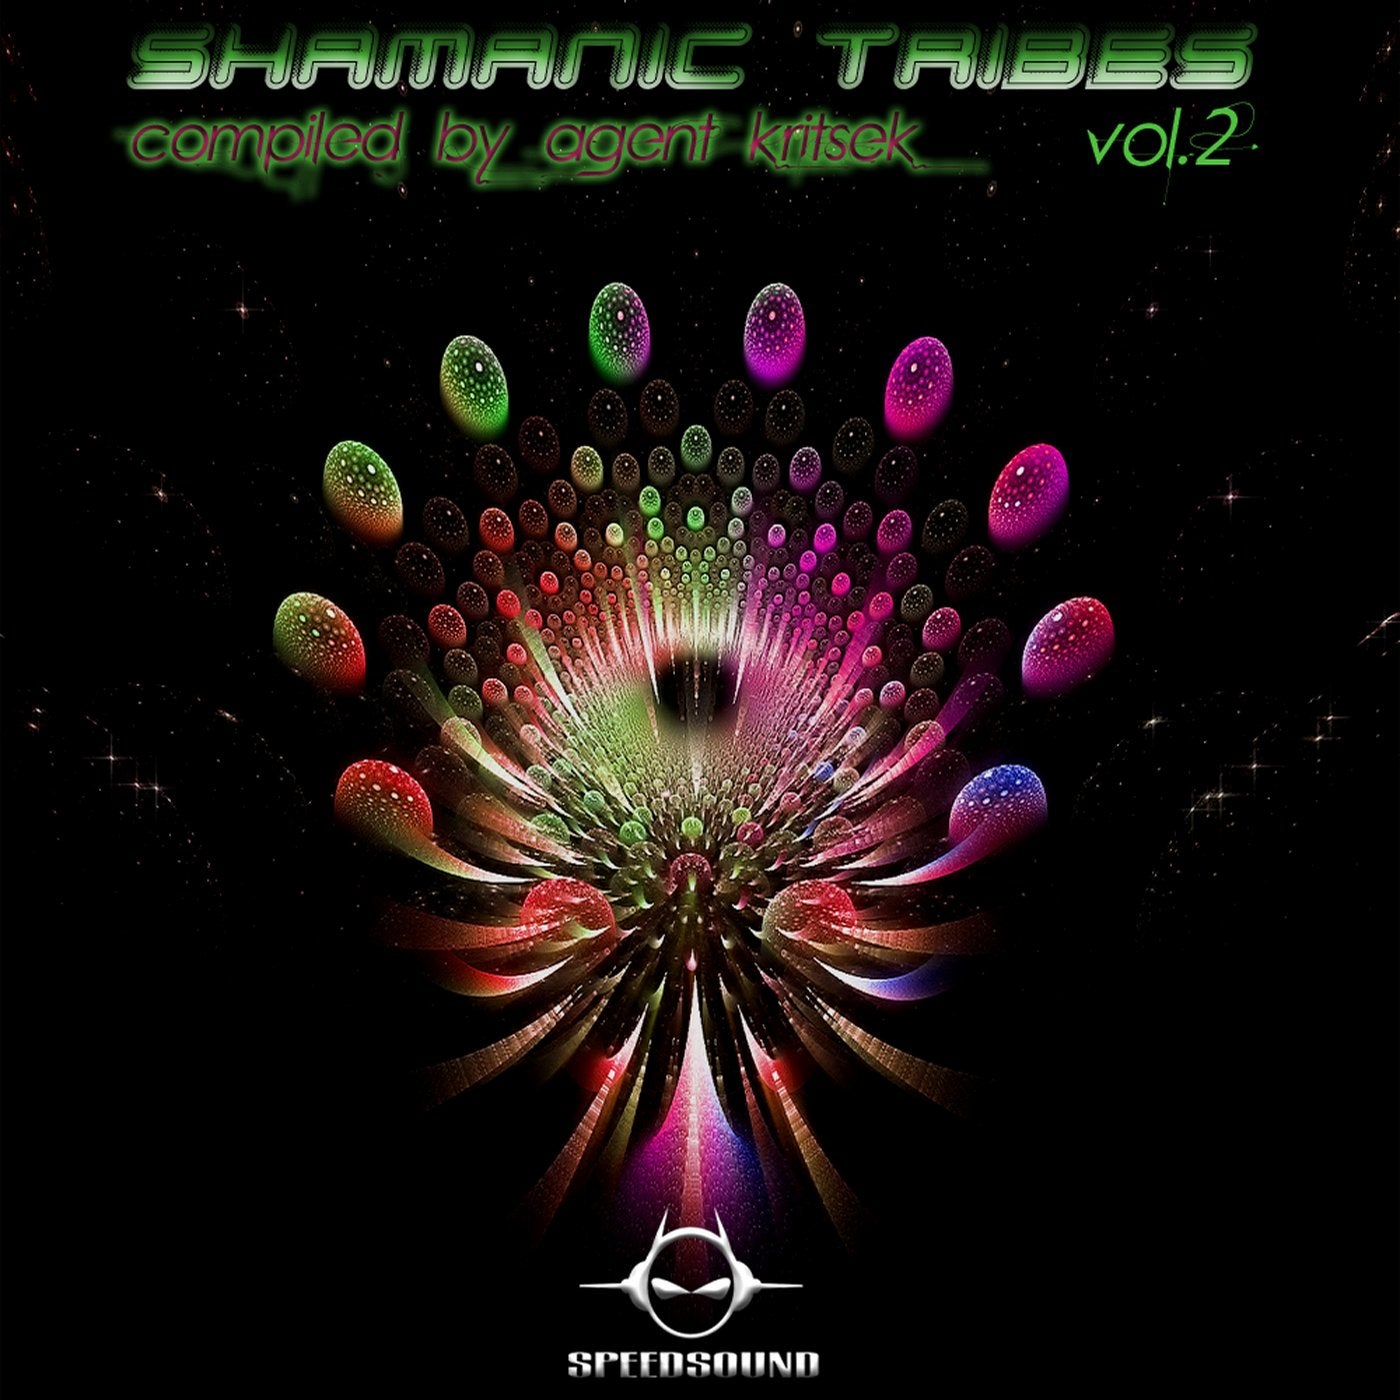 Shamanic Tribes, Vol. 2, compiled by Agent Kritsek